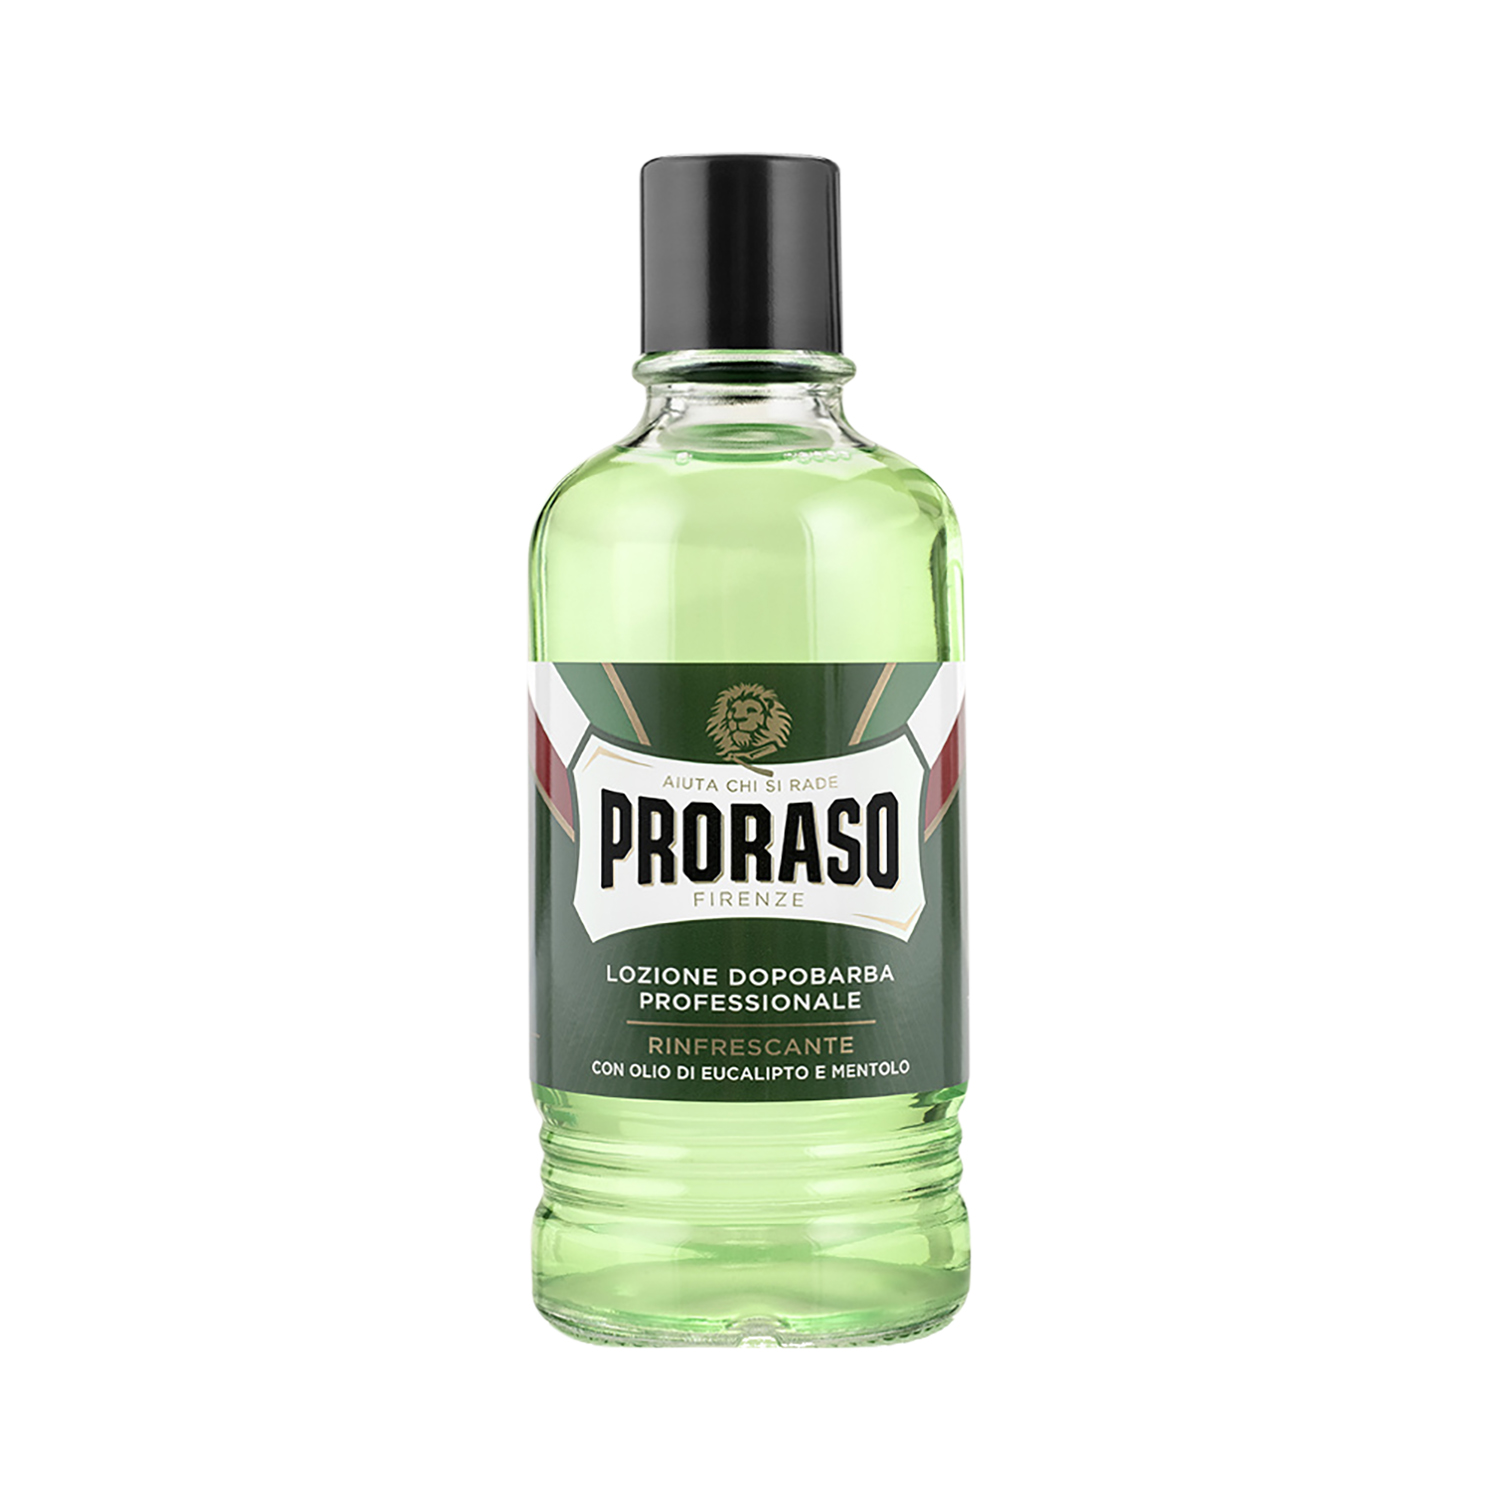 Proraso - After Shave Lotion - GREEN - PROFESSIONAL